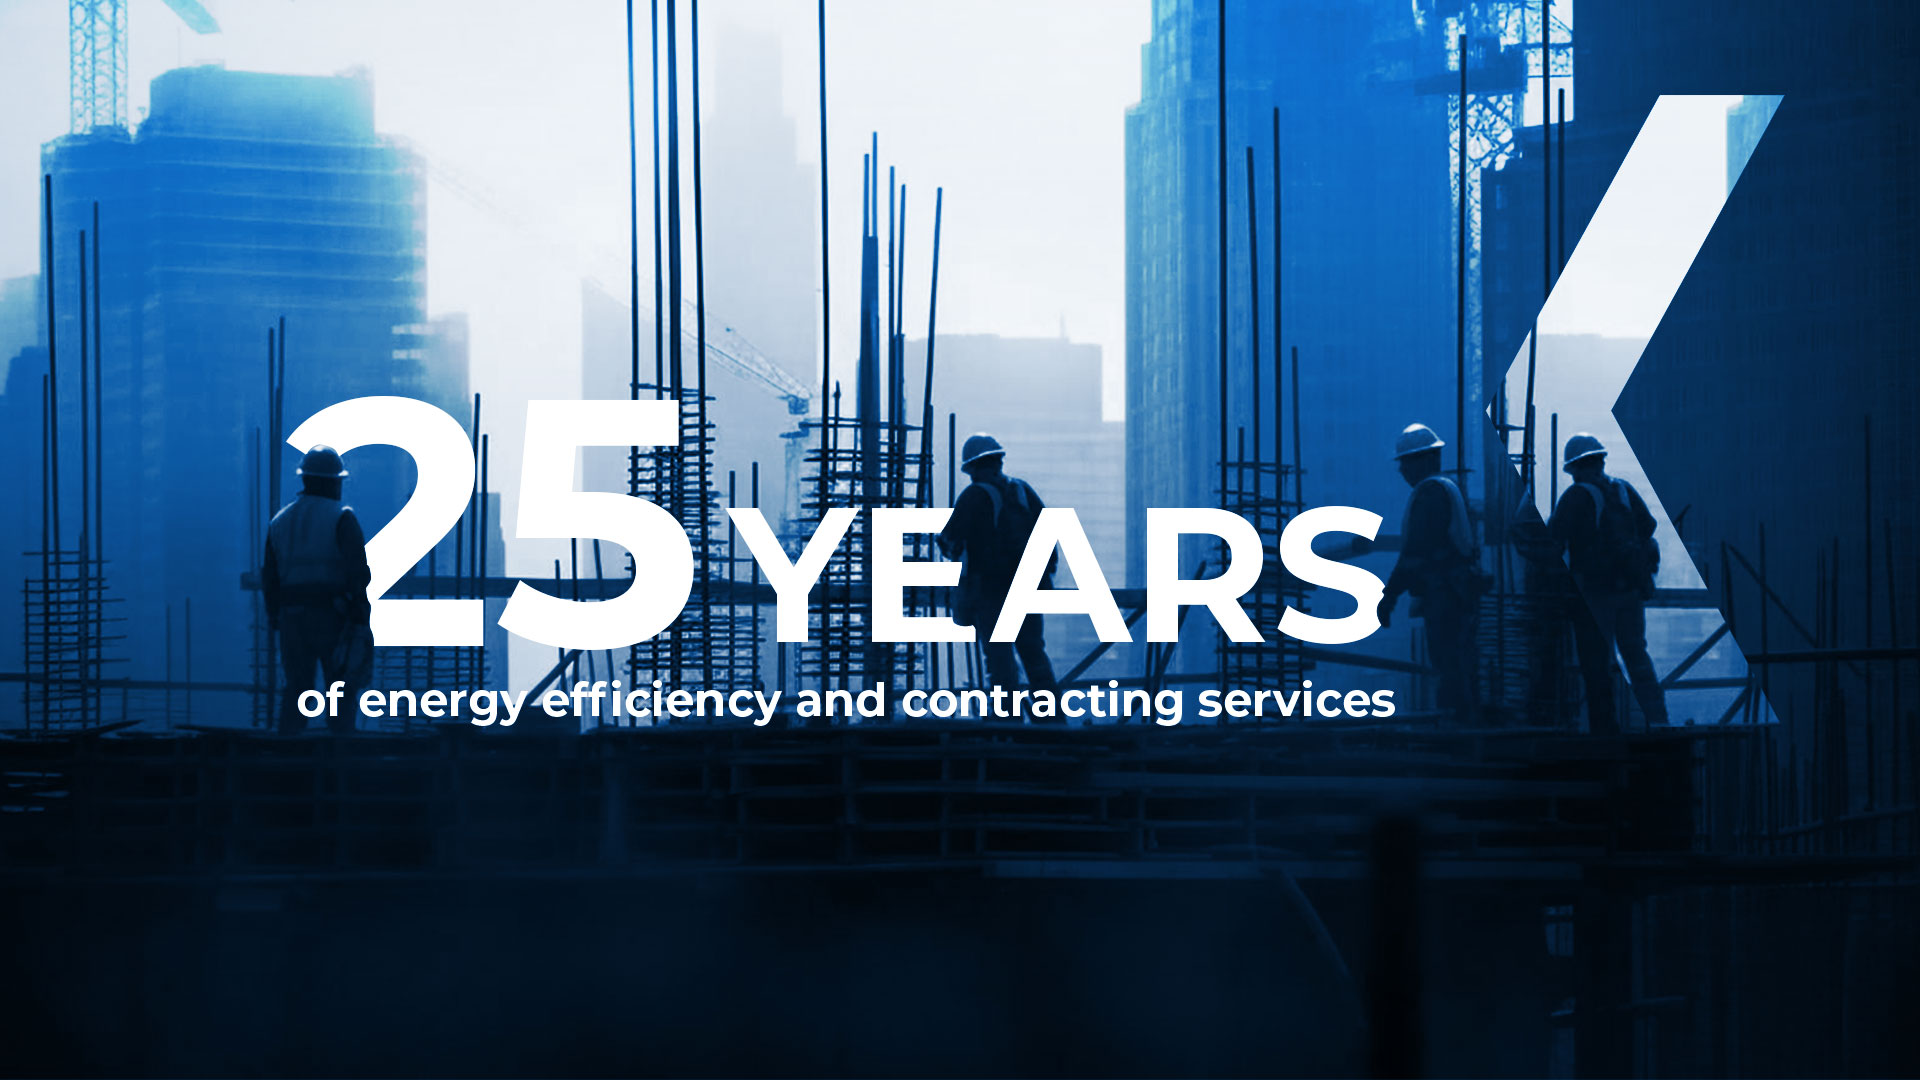 Website-banners-25years